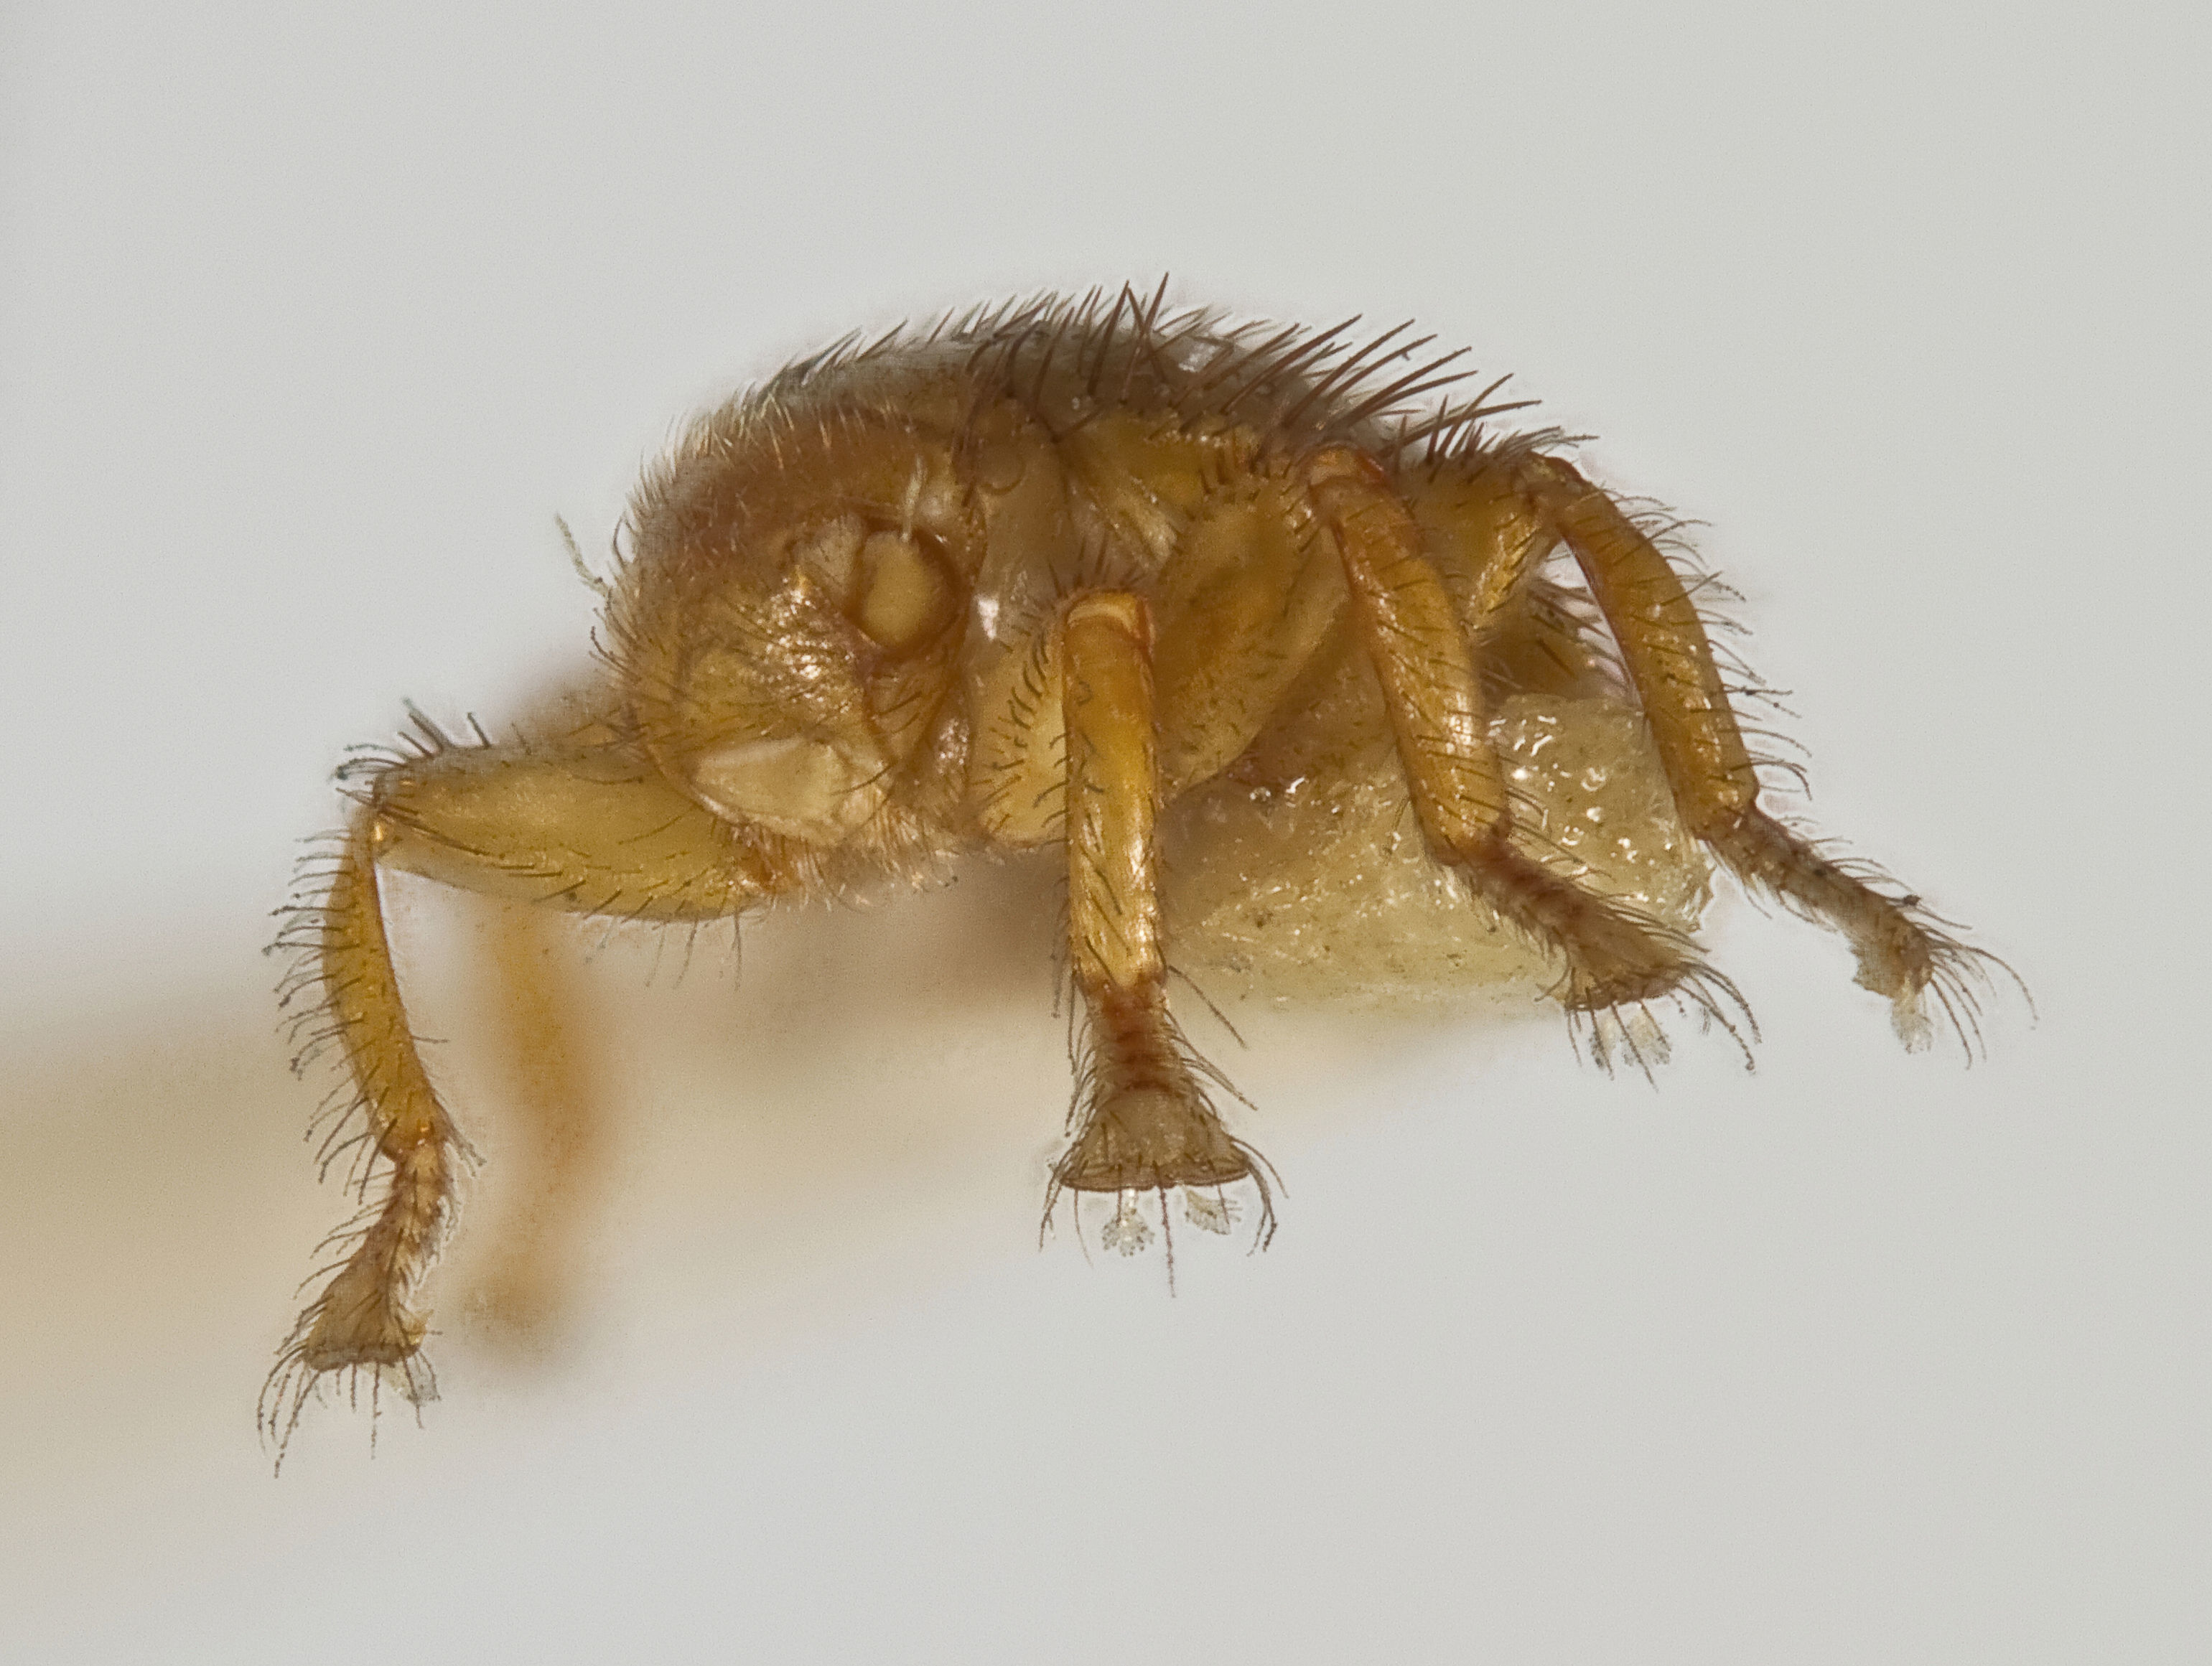 Image of Bee Louse